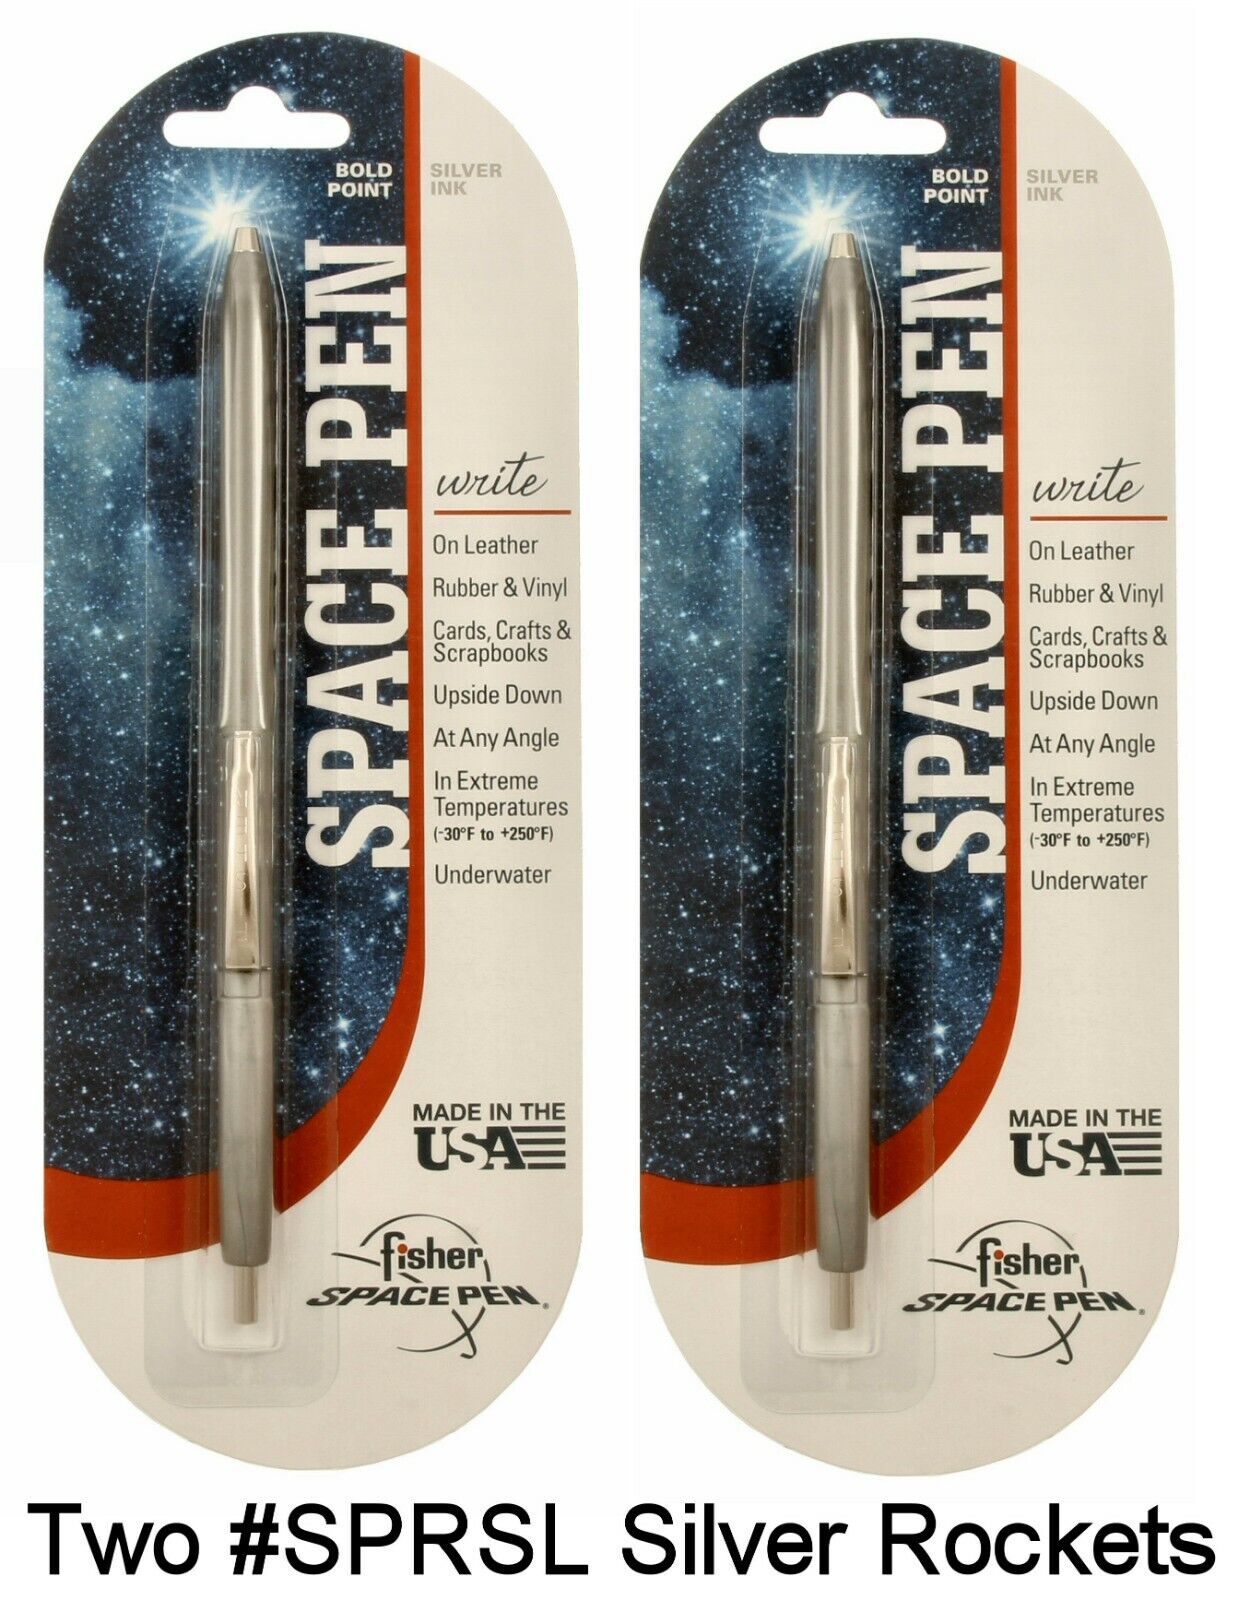 Two (2) Fisher Space Pens #SR80SL / Silver Rocket Pens with Silver Ink 